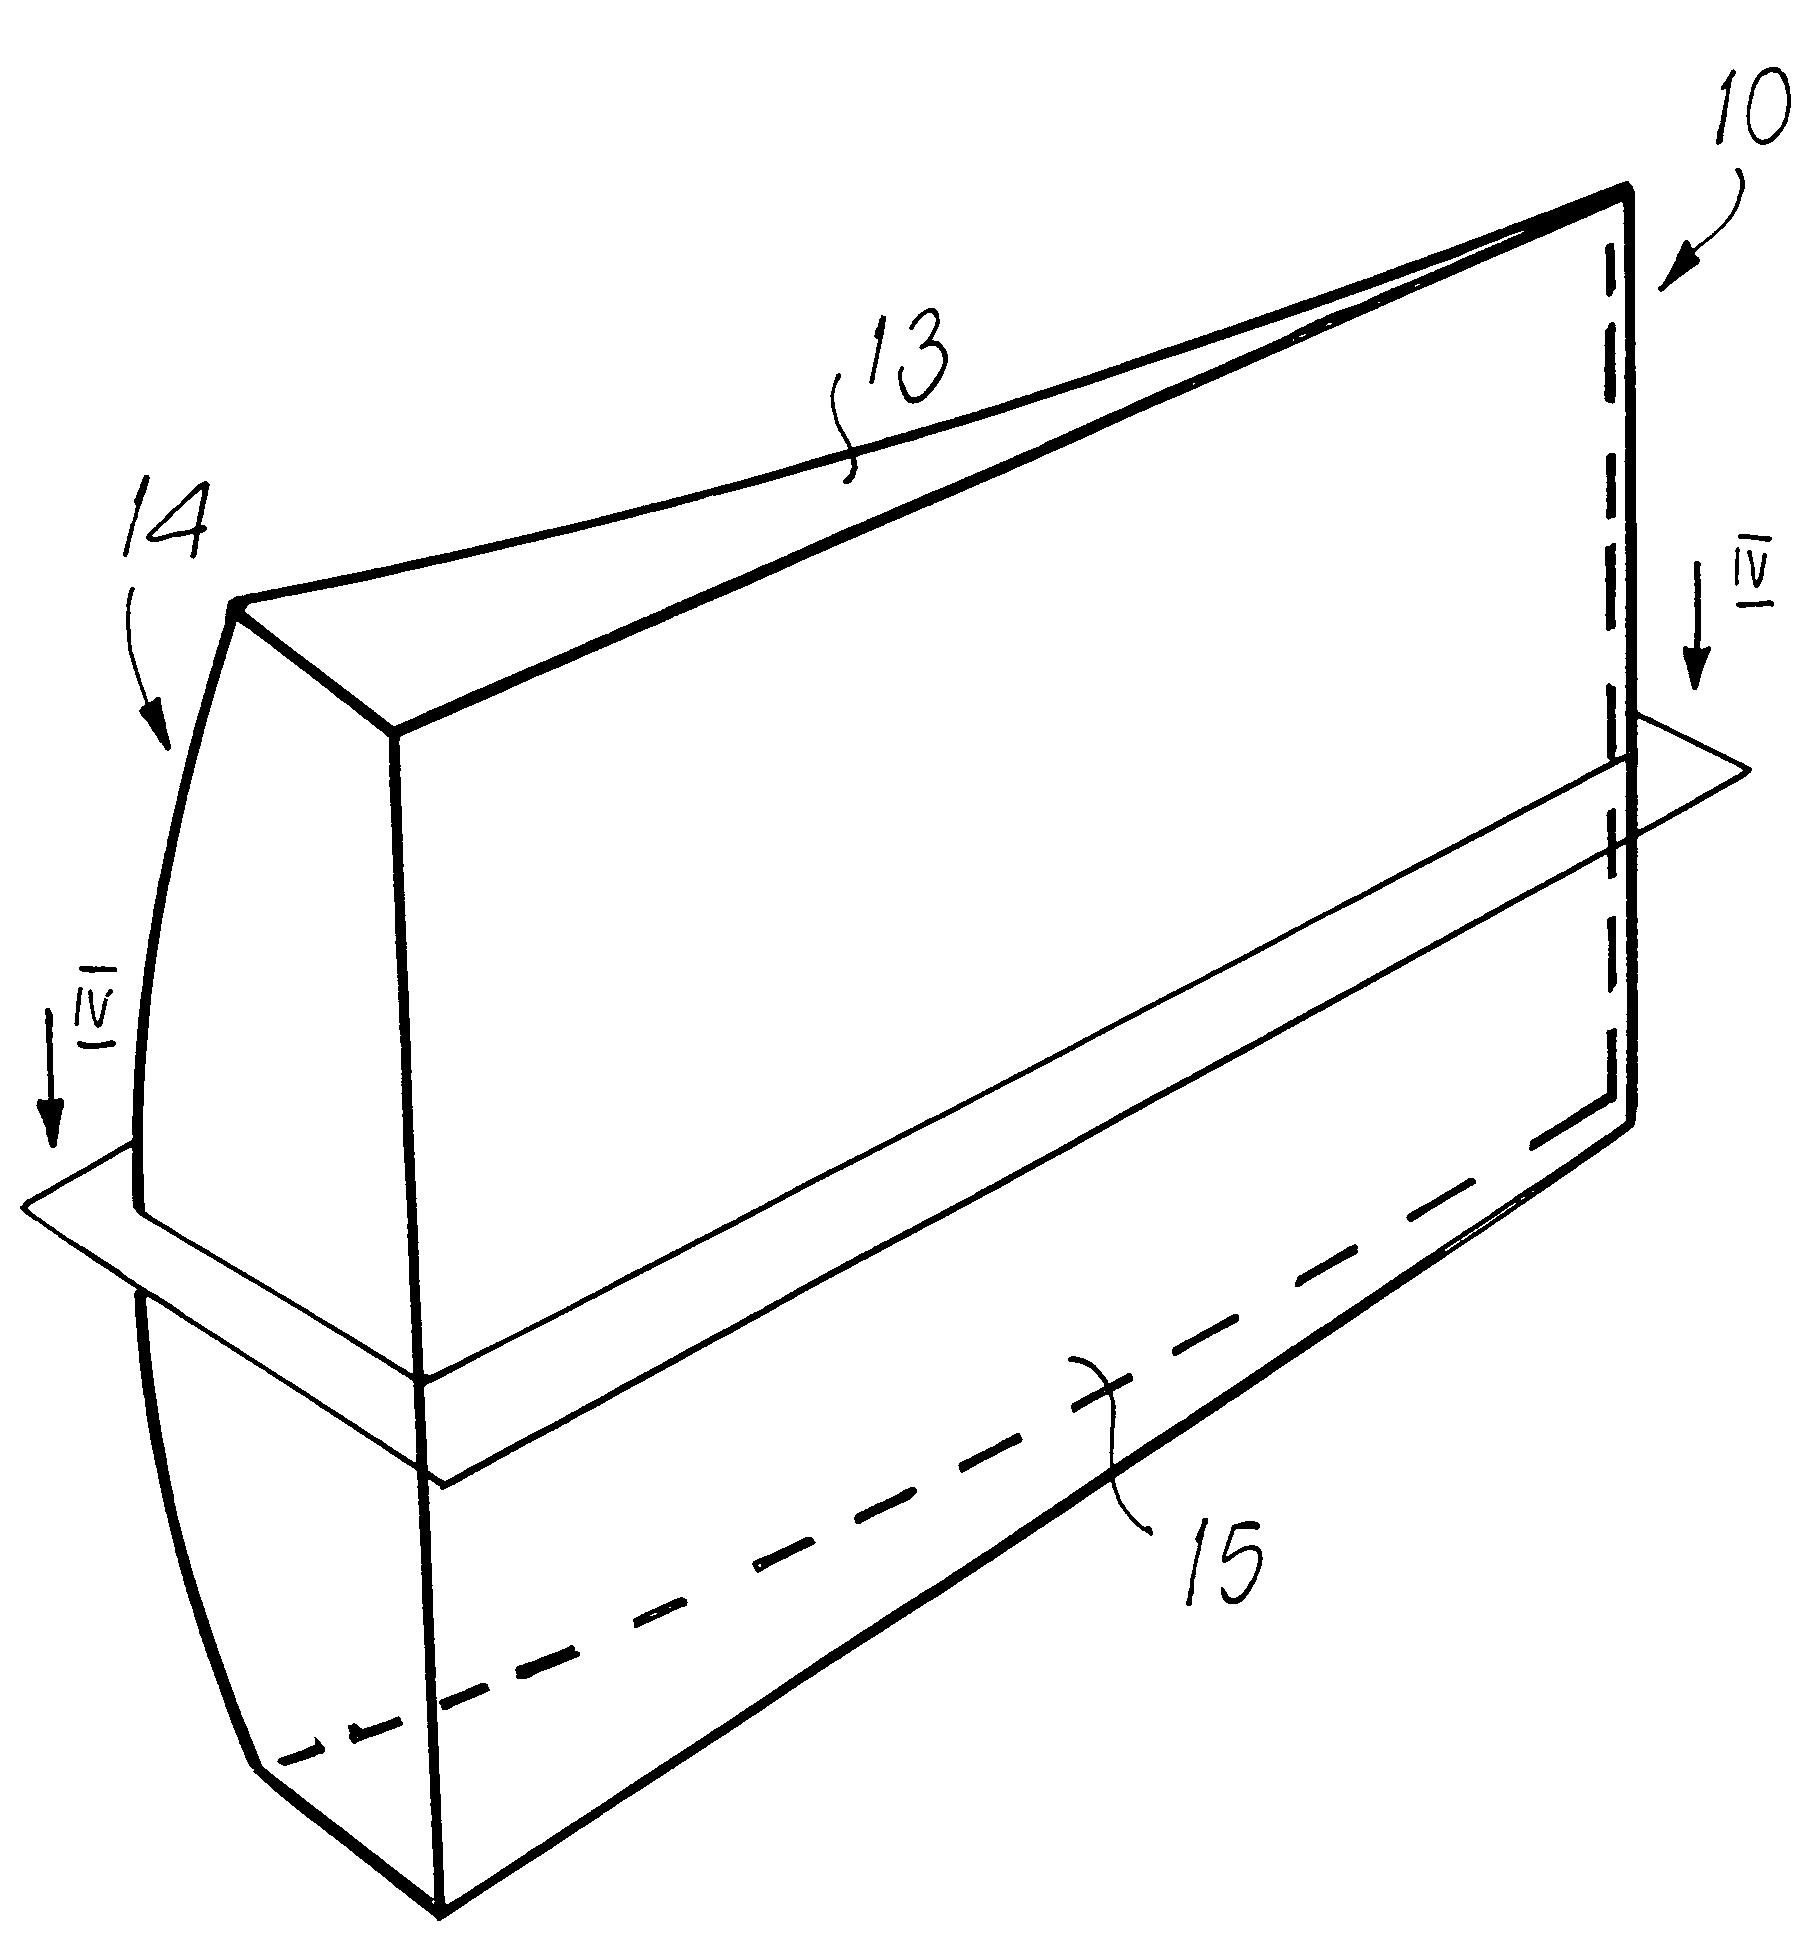 Vehicle rear-view mirror with wide viewing angle and reduced image distortion